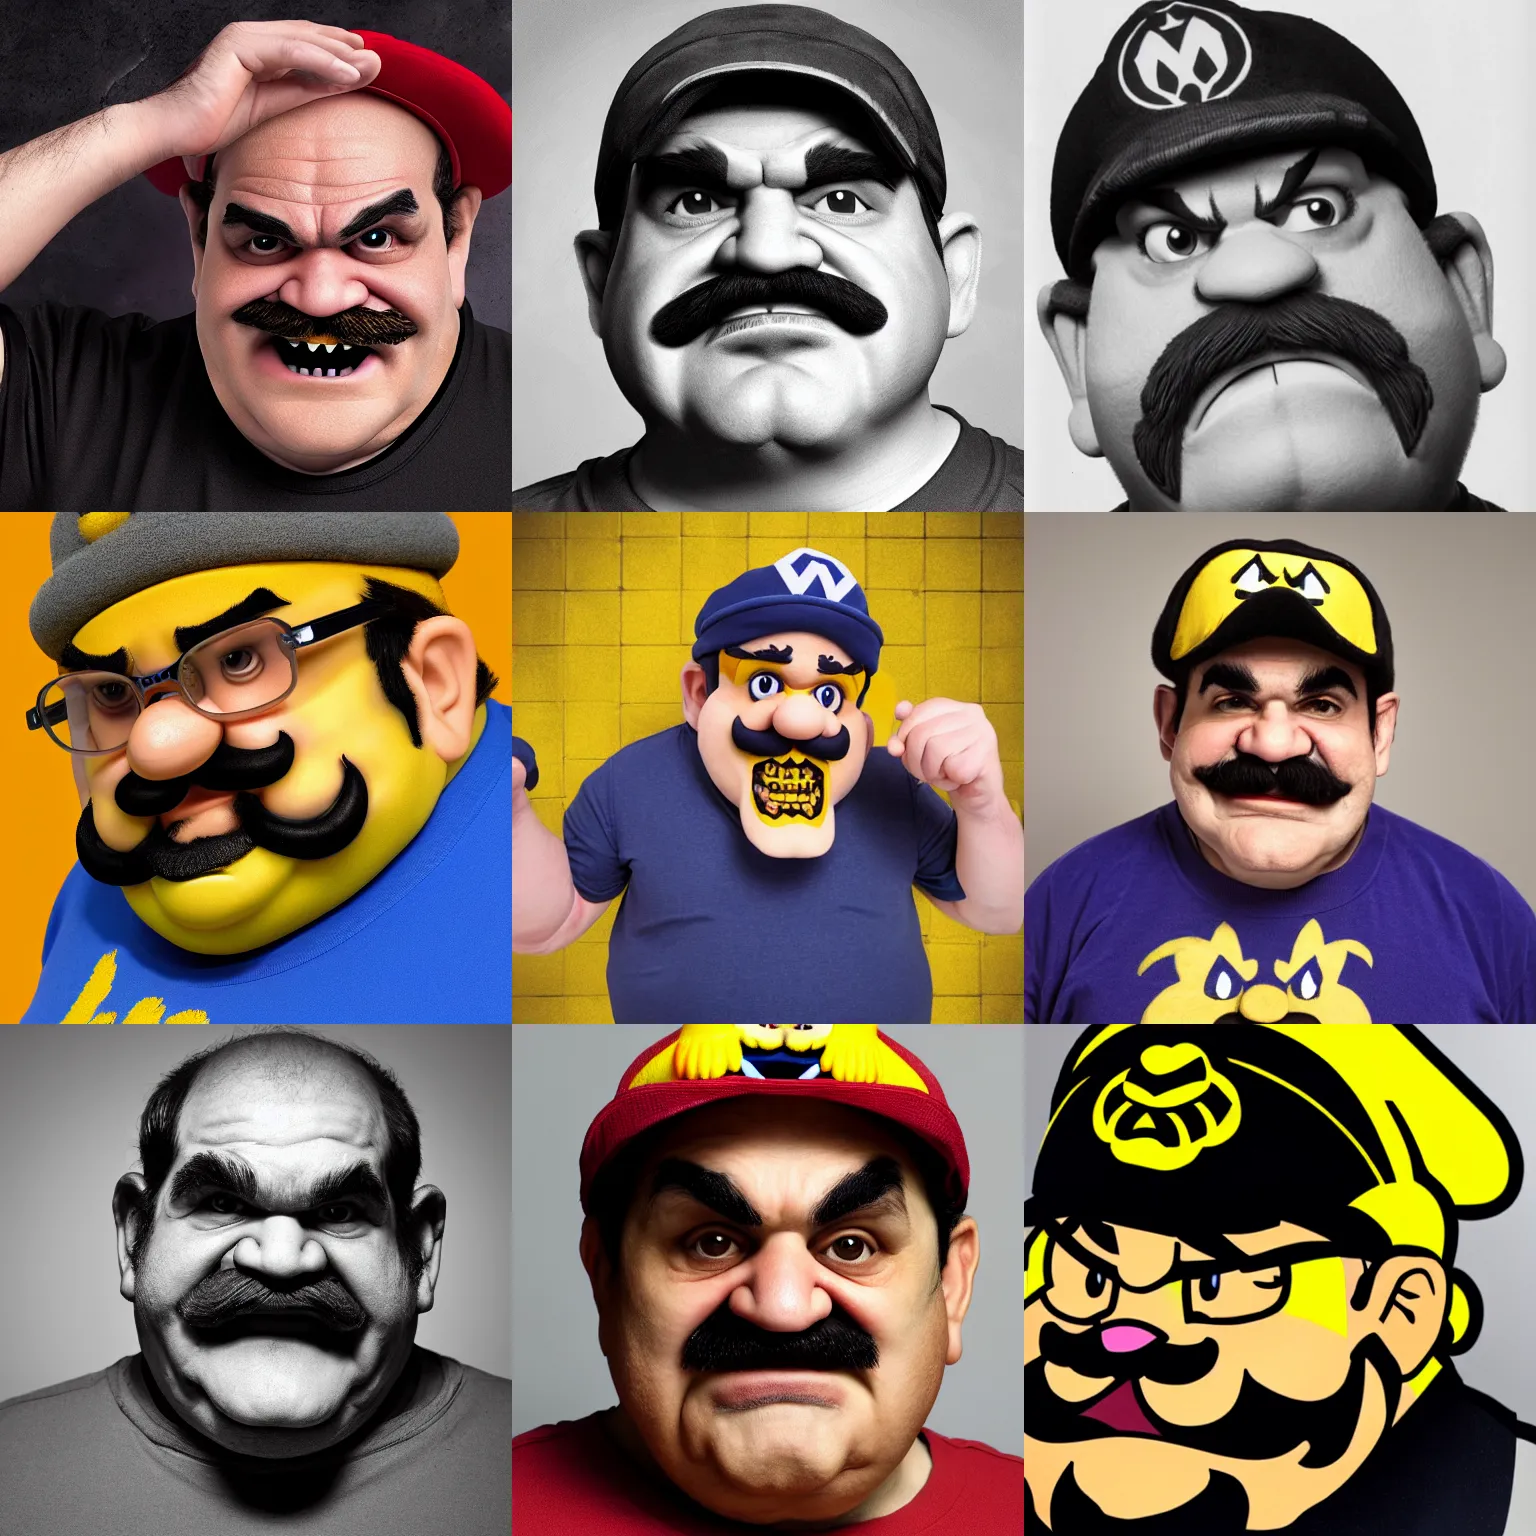 Prompt: Wario as a real person, studio photo, realistic